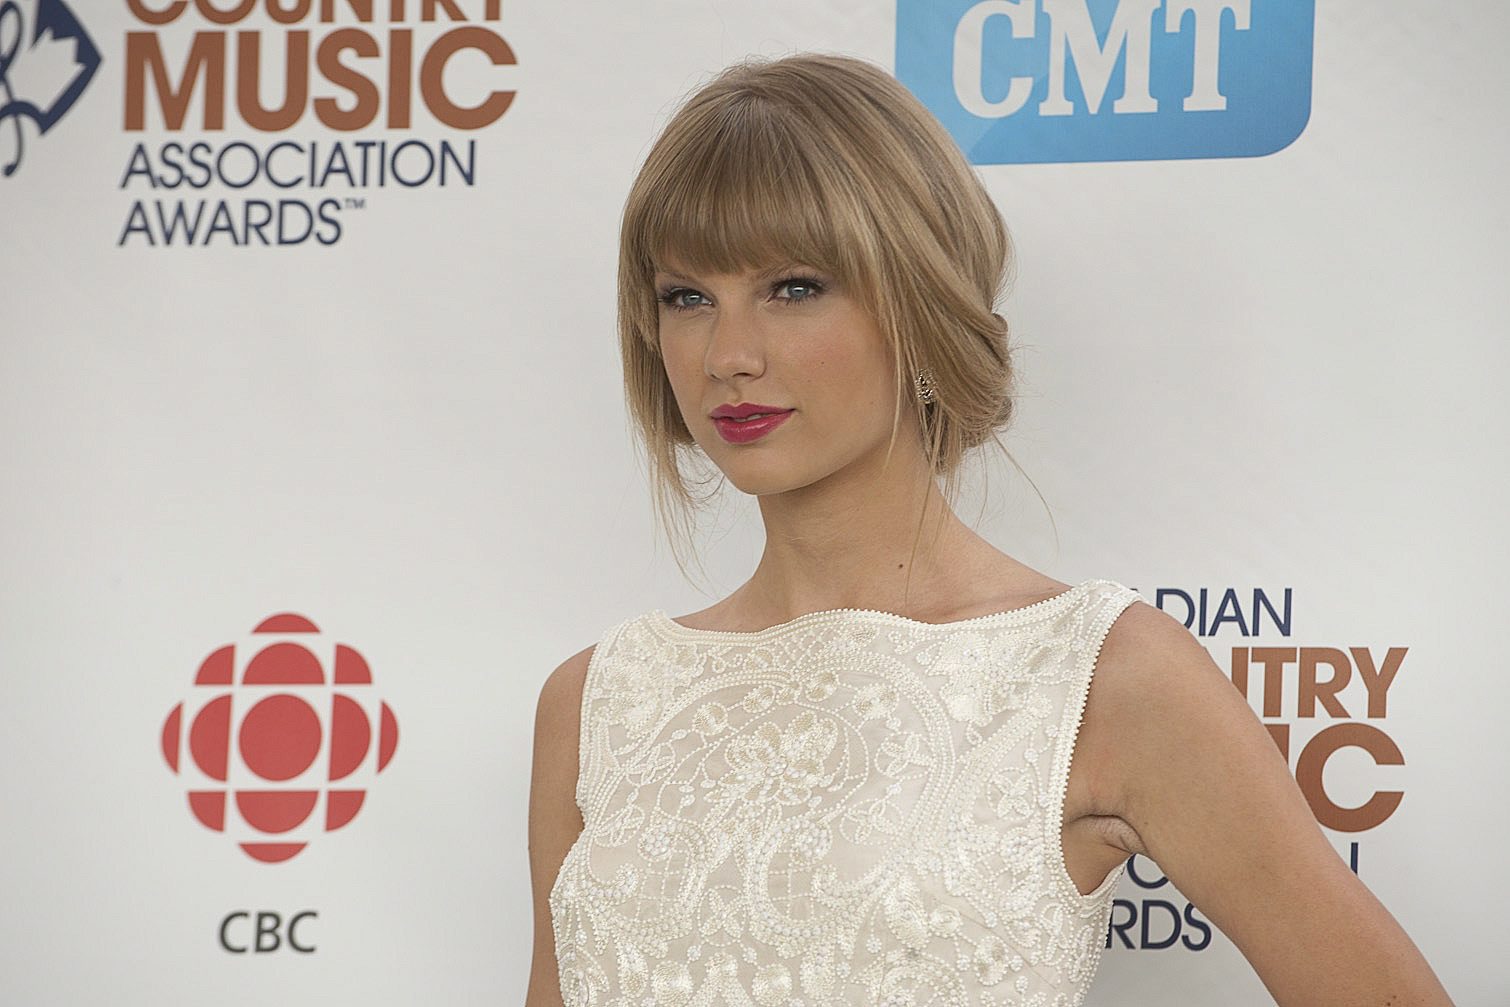 http://www.taylorpictures.net/albums/app/2012/ccmaawards/001.jpg